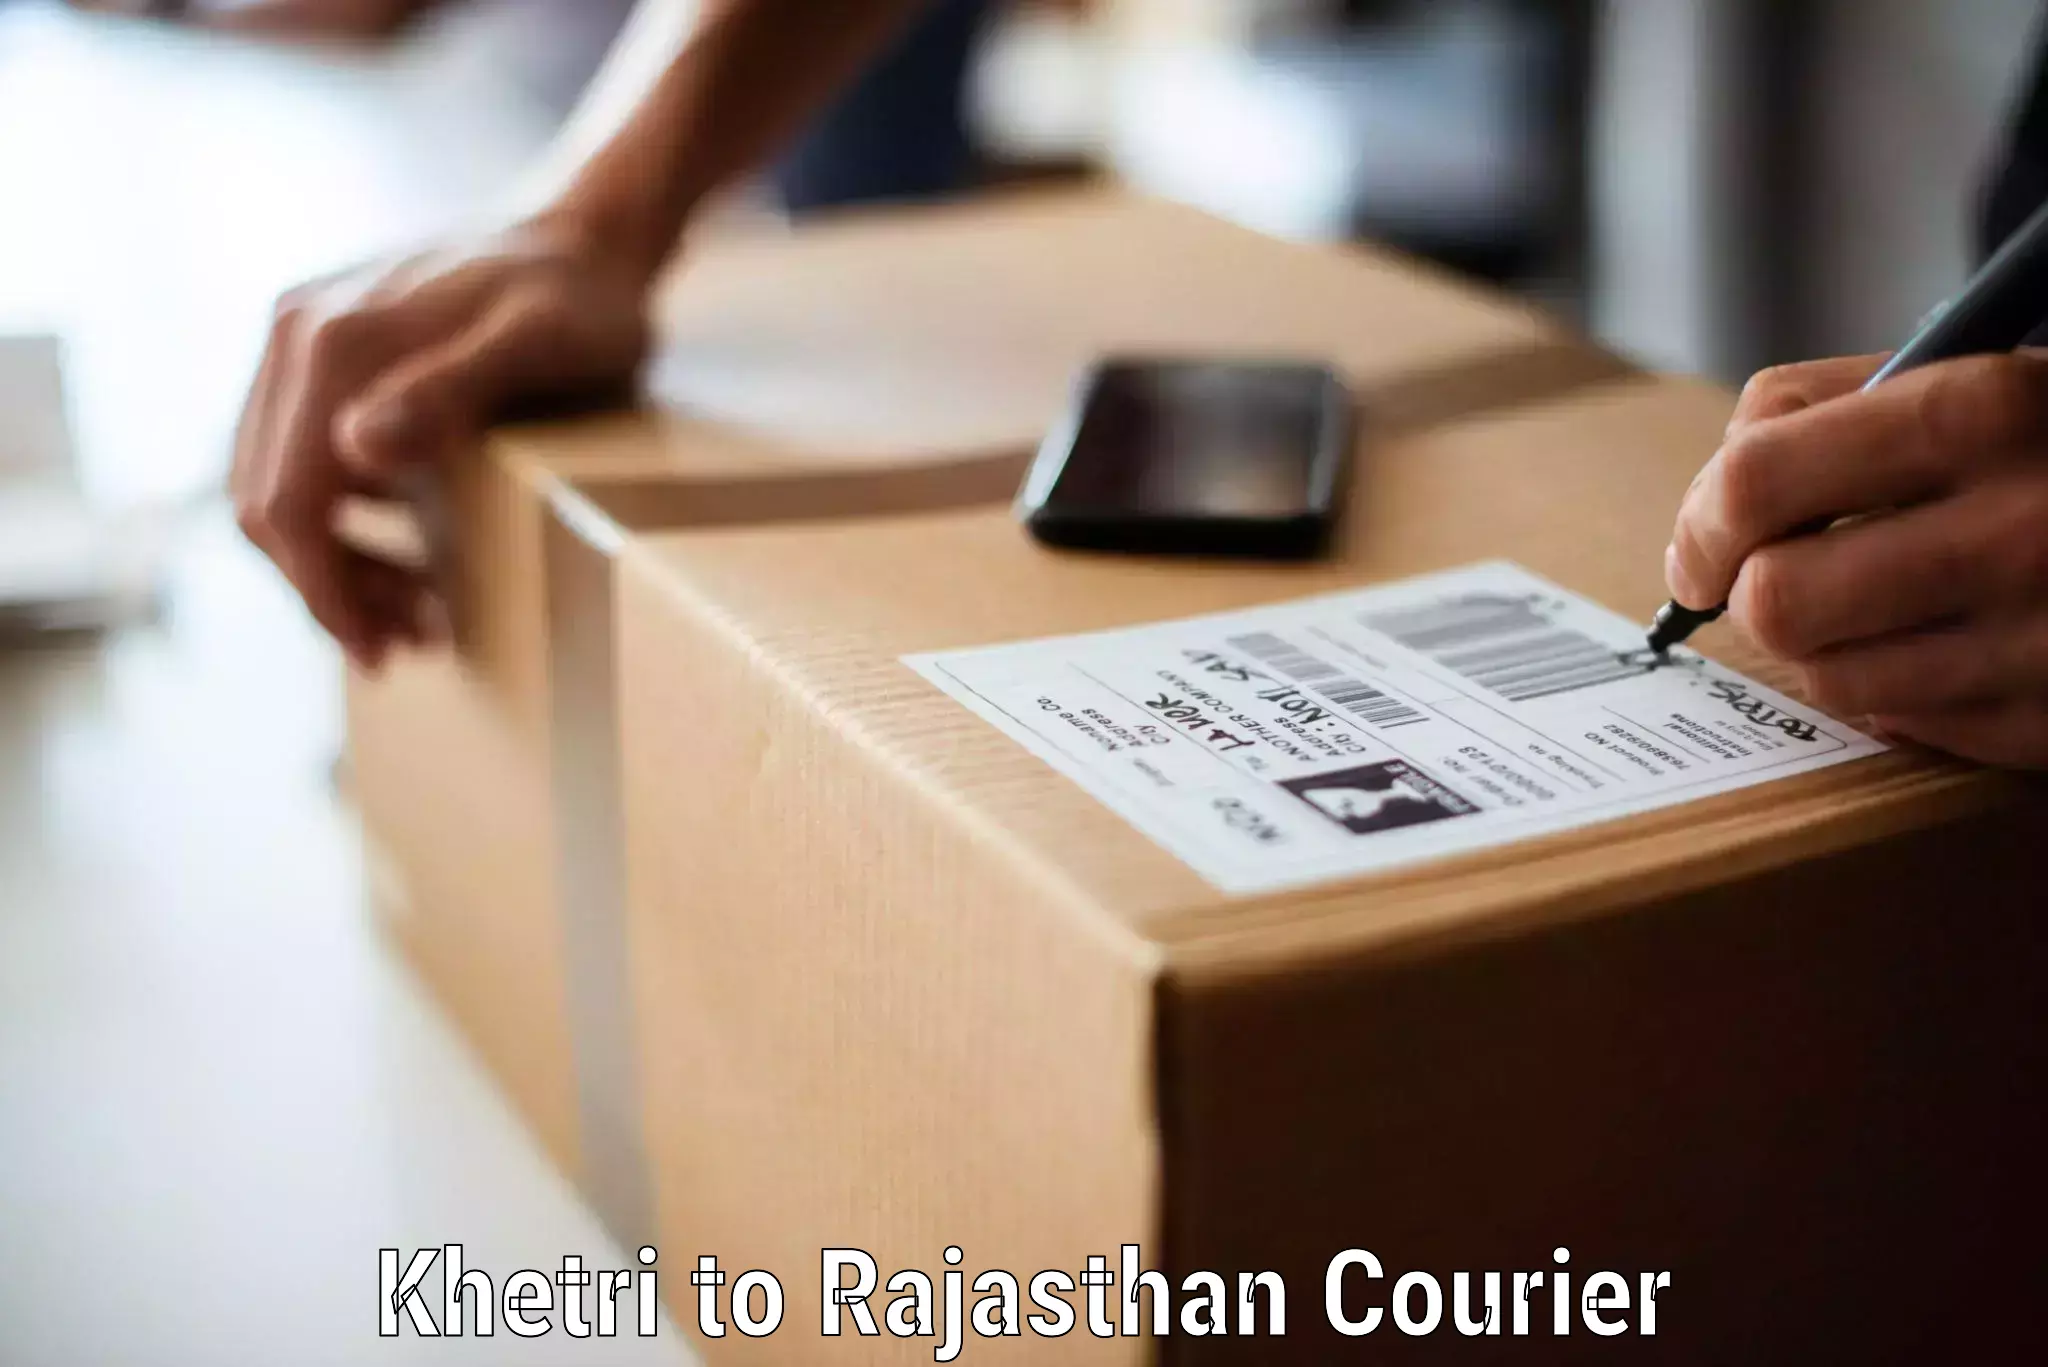 Safe household movers Khetri to Rajasthan